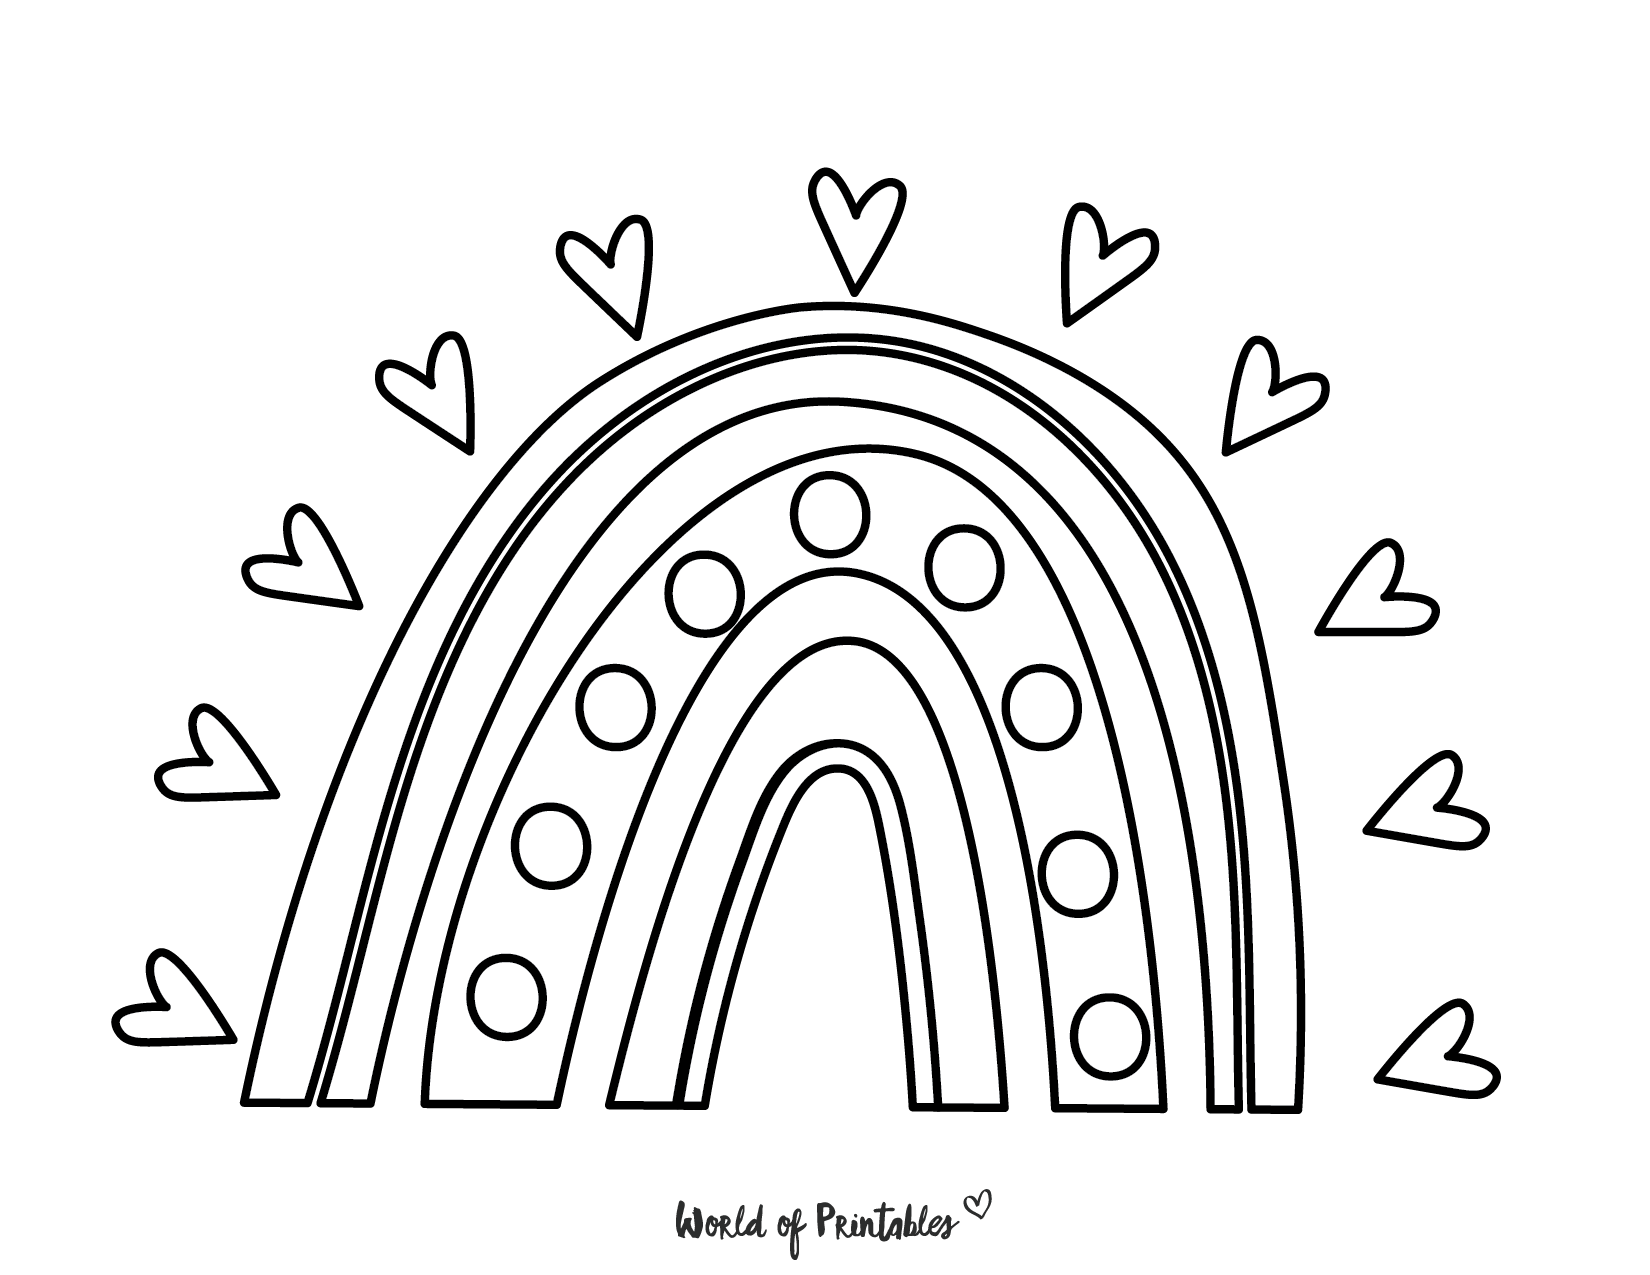 21 Best Rainbow Coloring Pages To Brighten Your Day   World of ...